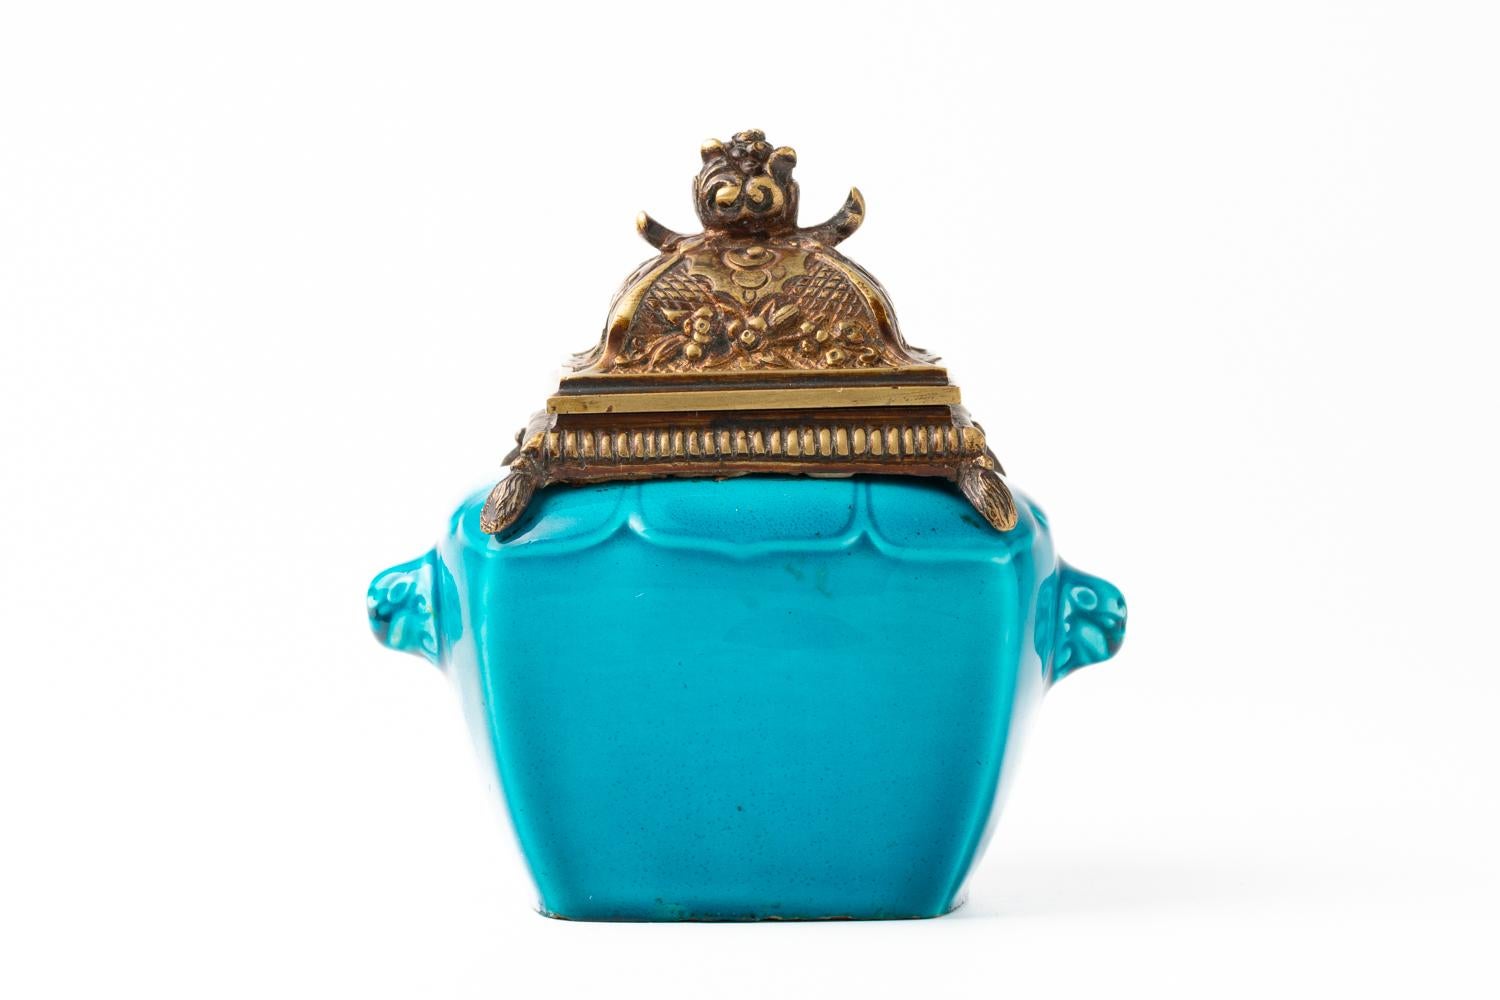 A 19th century Blue And Bronze Inkwell By Théodore Deck In Good Condition For Sale In Portland, GB